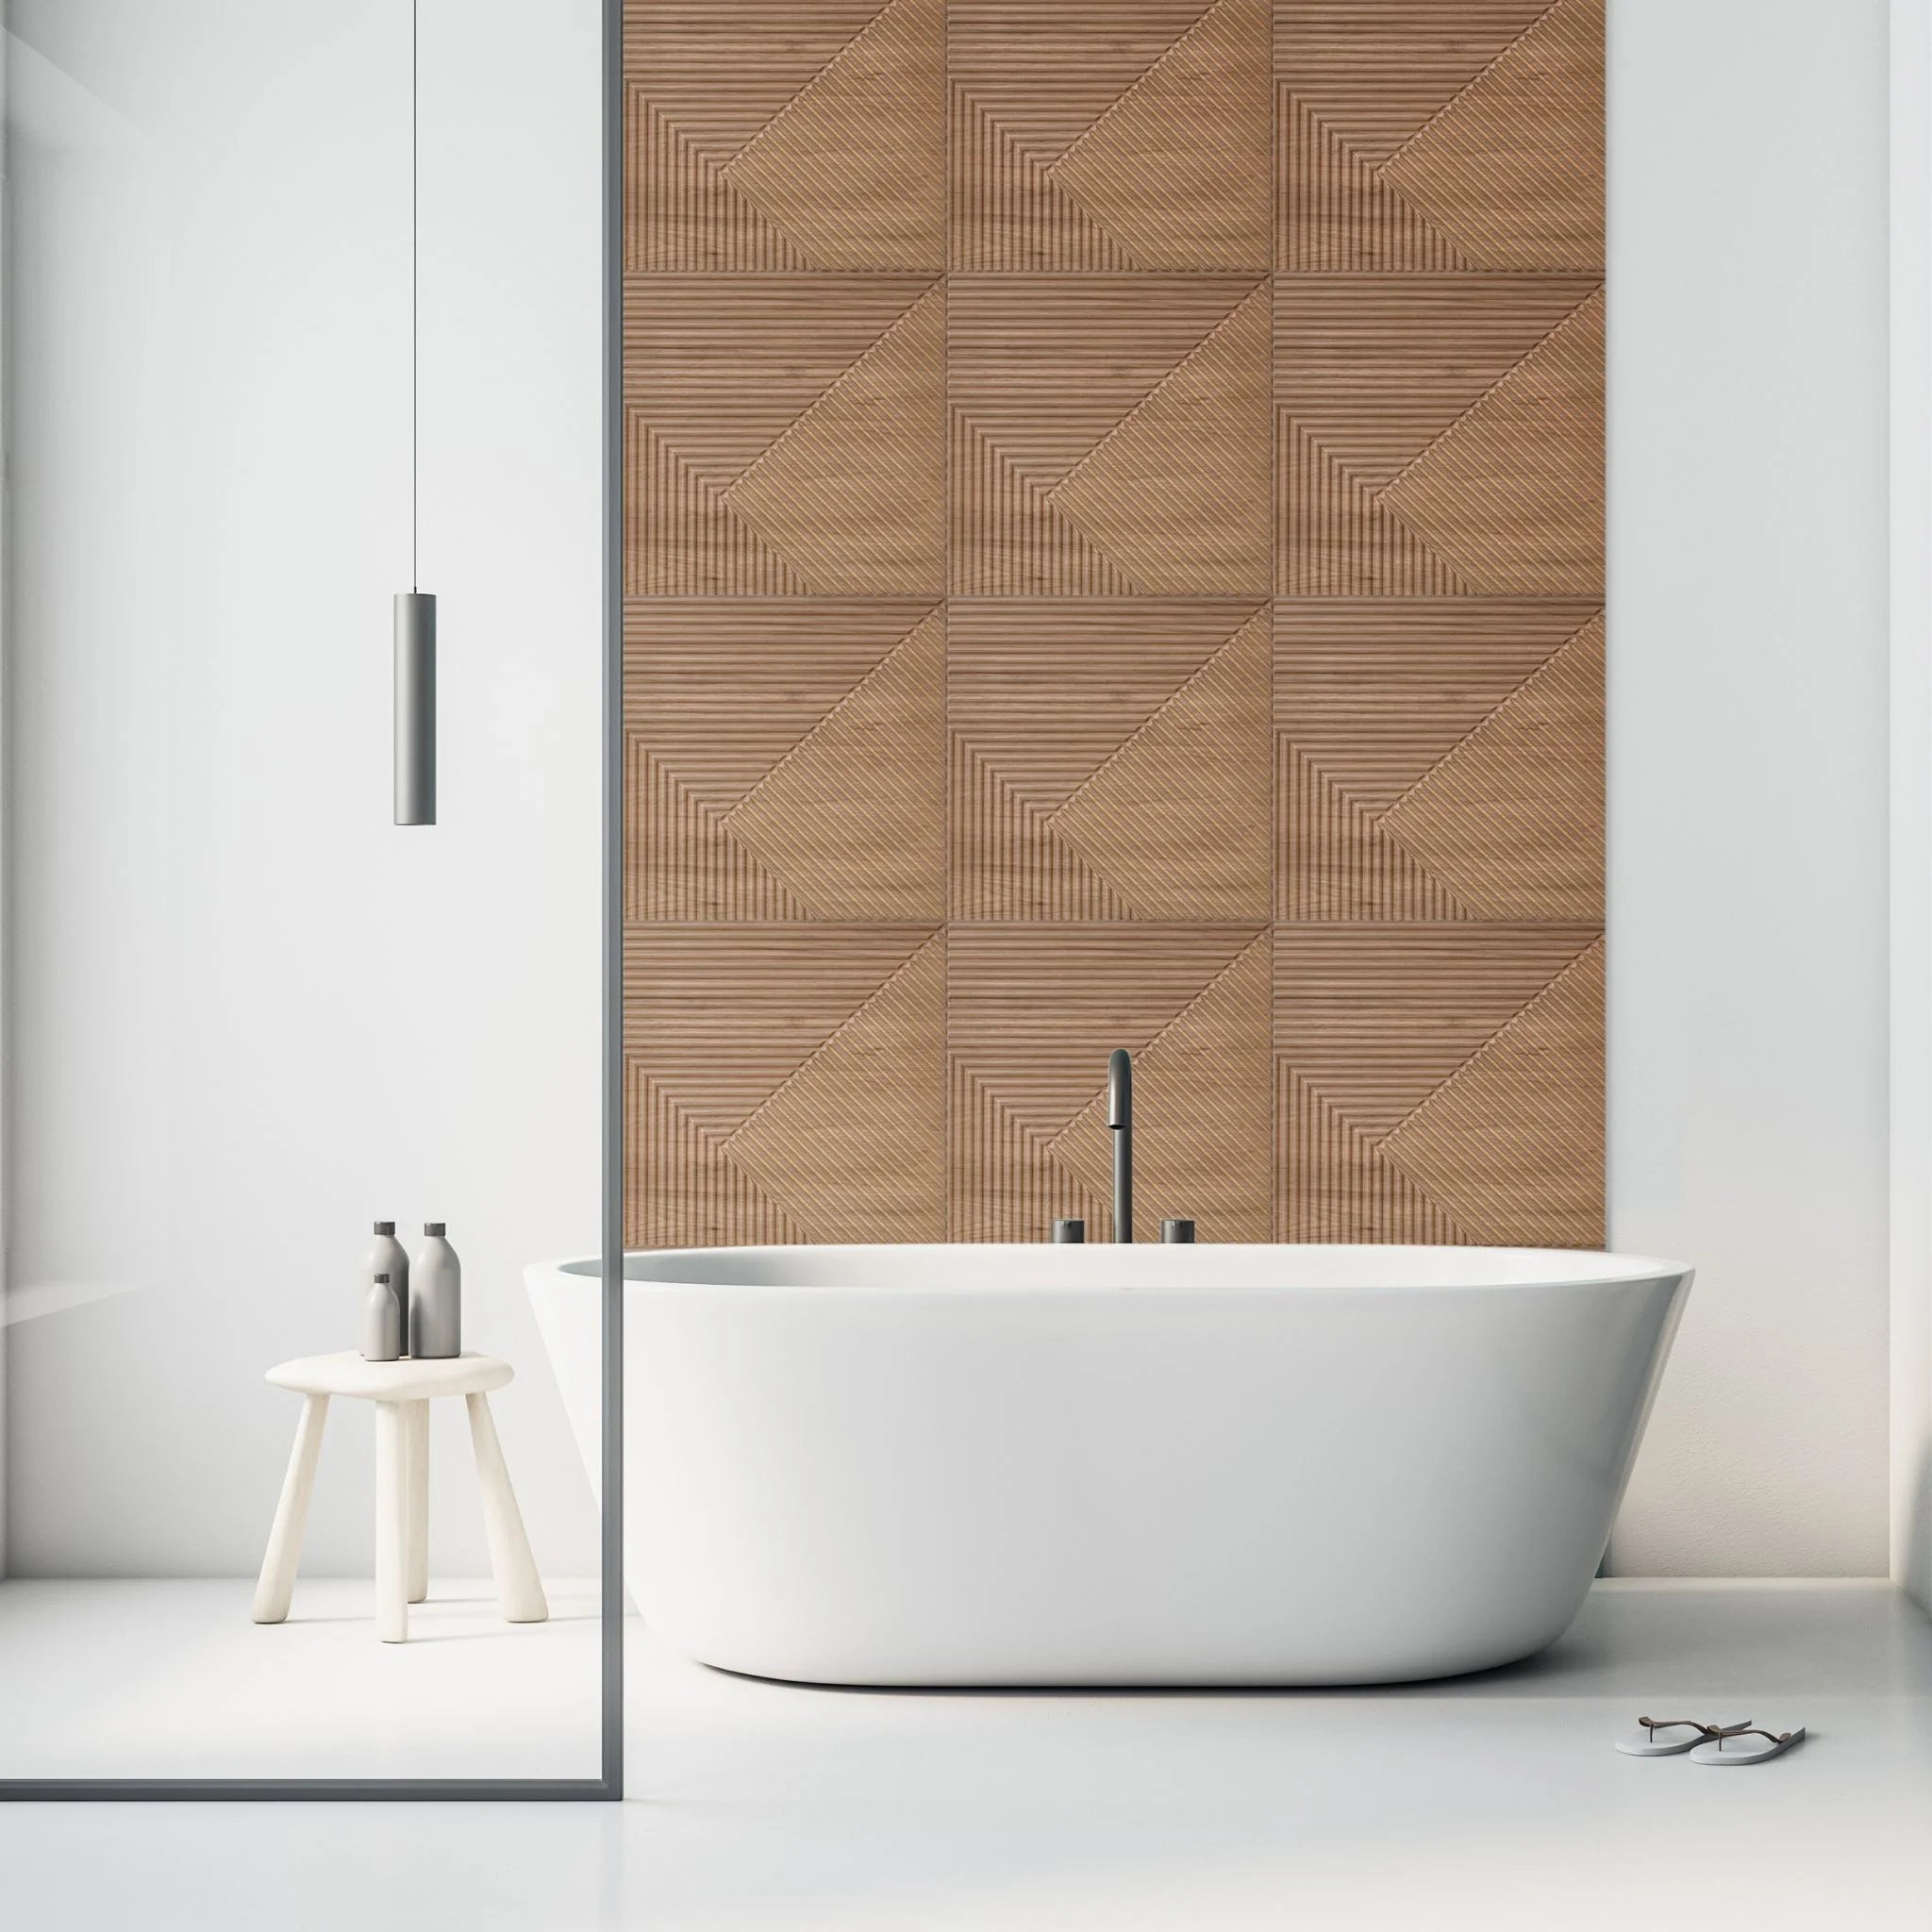 Contemporary bathroom with wooden geometric PVC wall panels